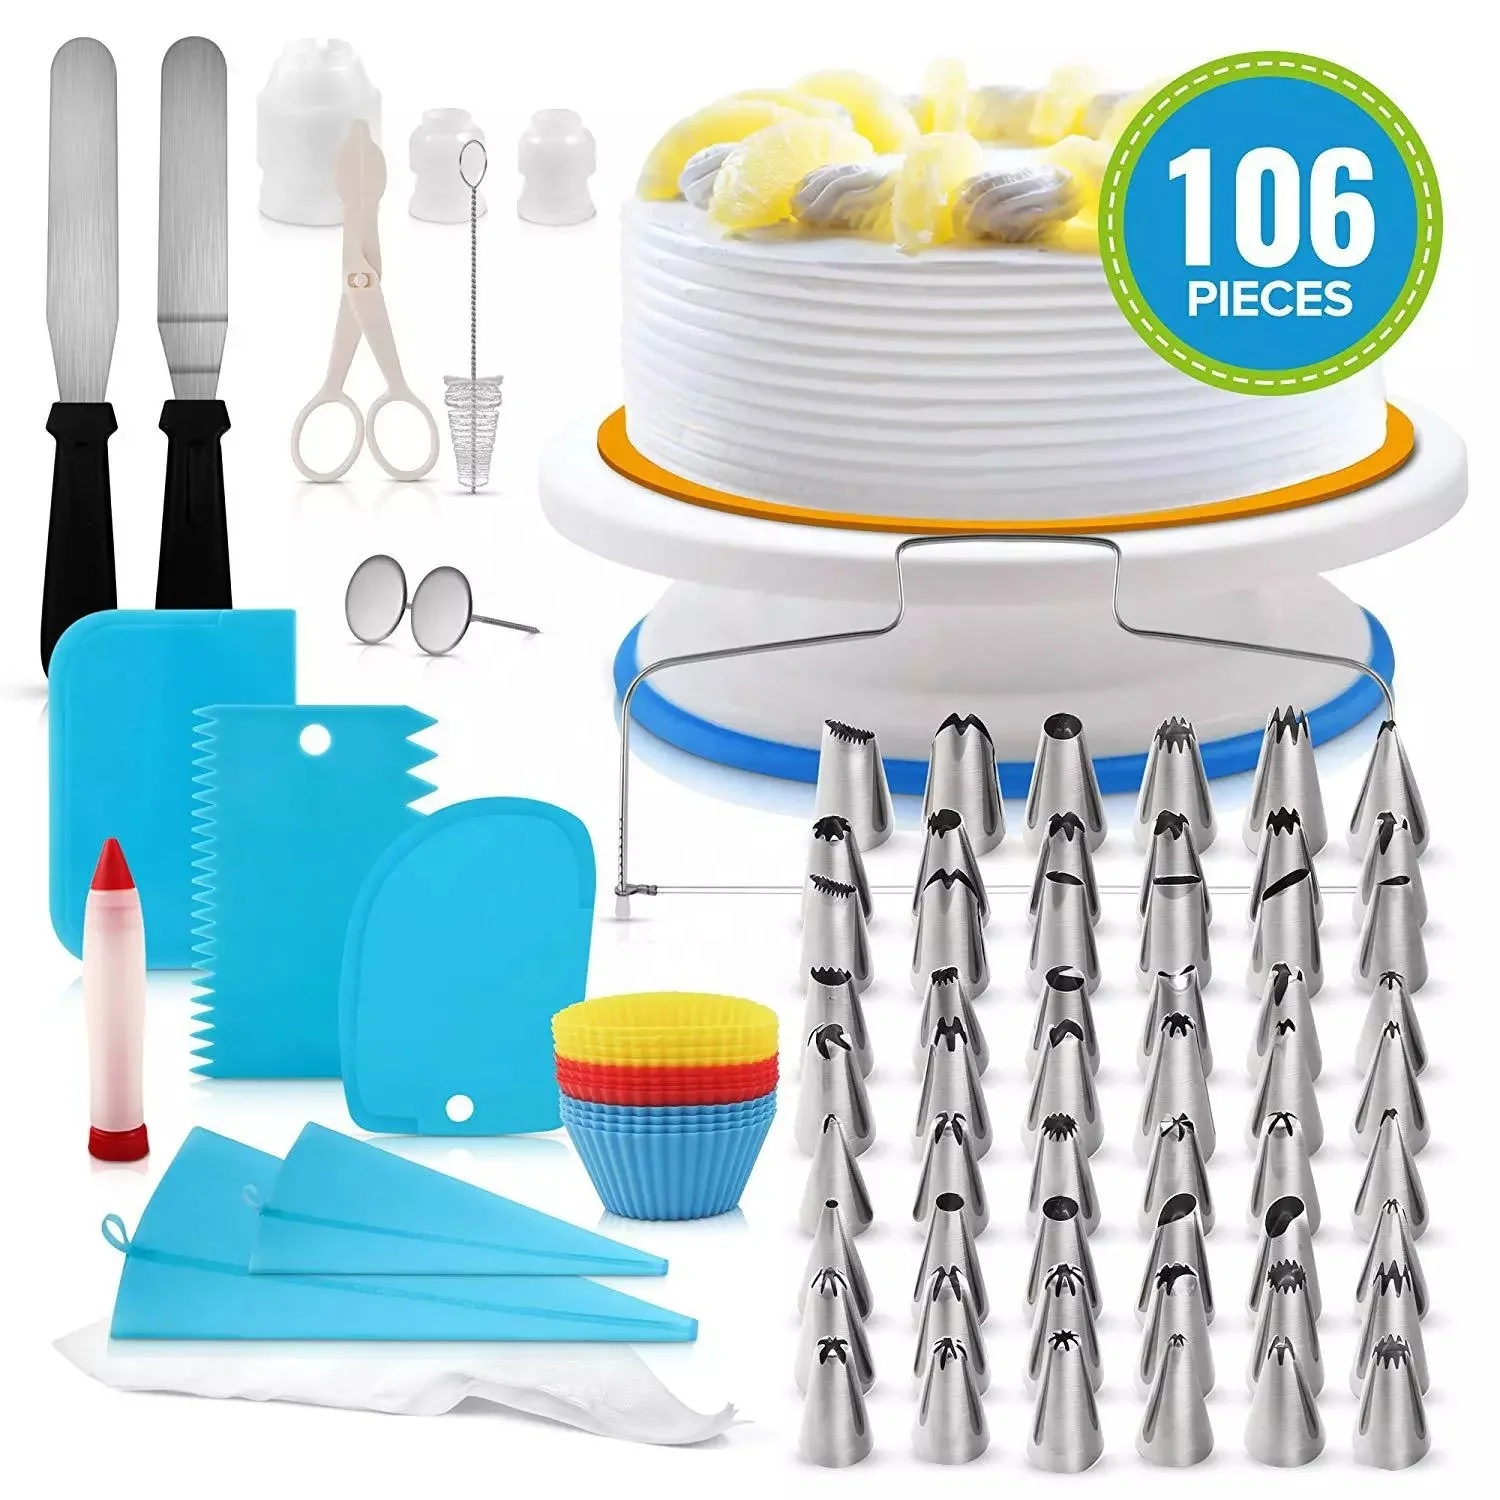 

106 PCS Hot Sale Cake Decorating Tip Set Baking Supplies Rotating Cake Stand Turntable Tools Kit Plastic Cake Stand Icing Tips